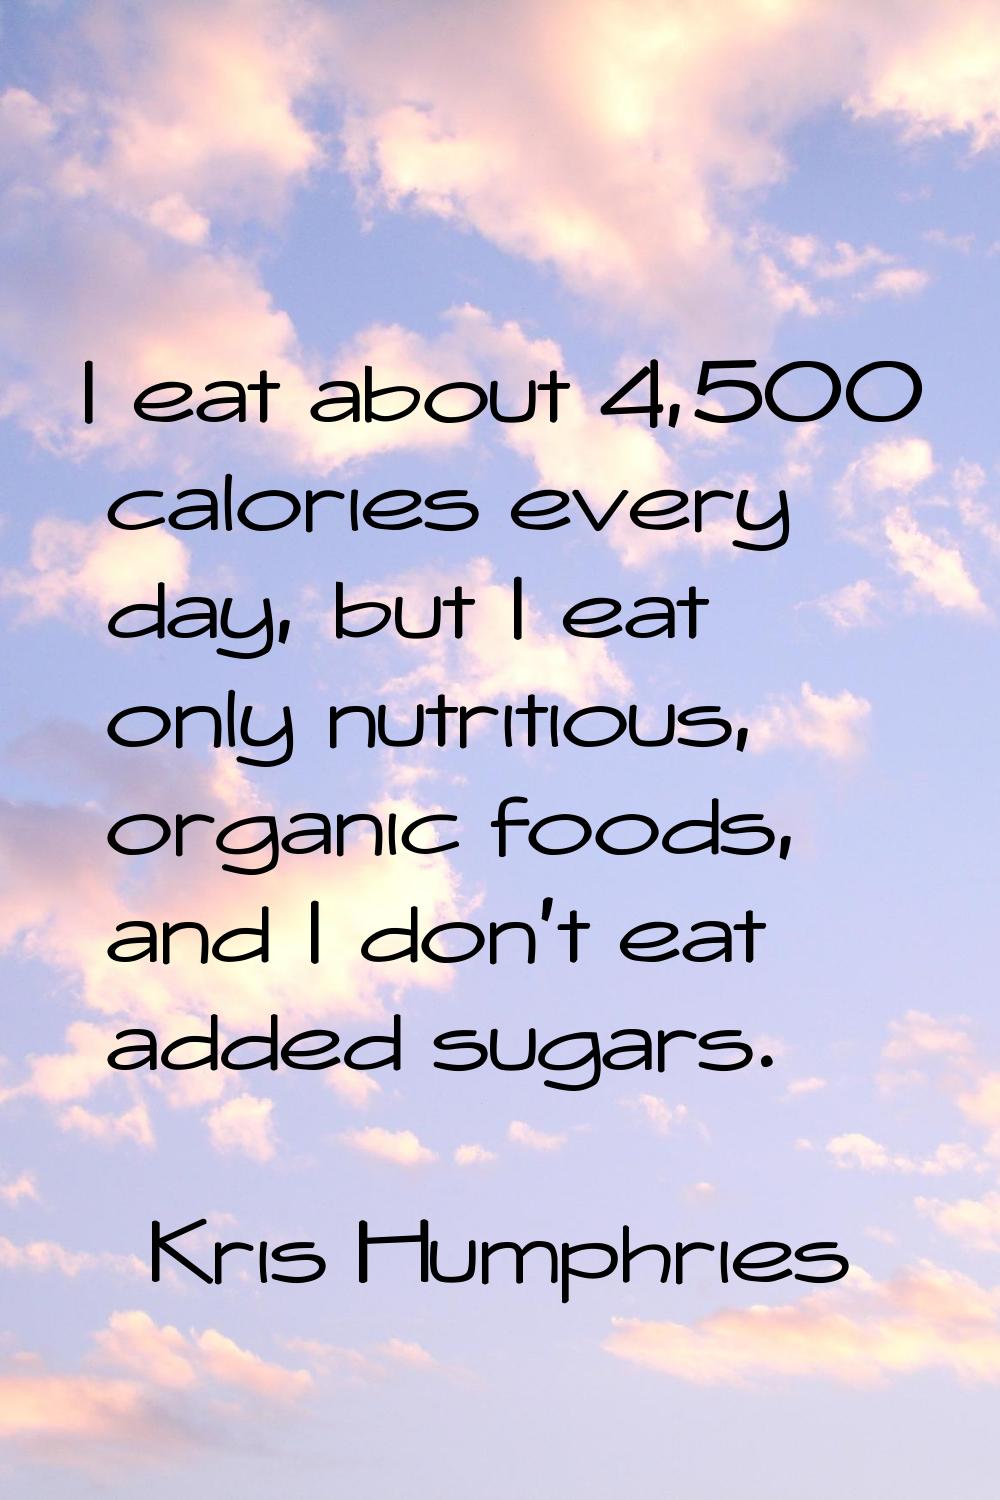 I eat about 4,500 calories every day, but I eat only nutritious, organic foods, and I don't eat add